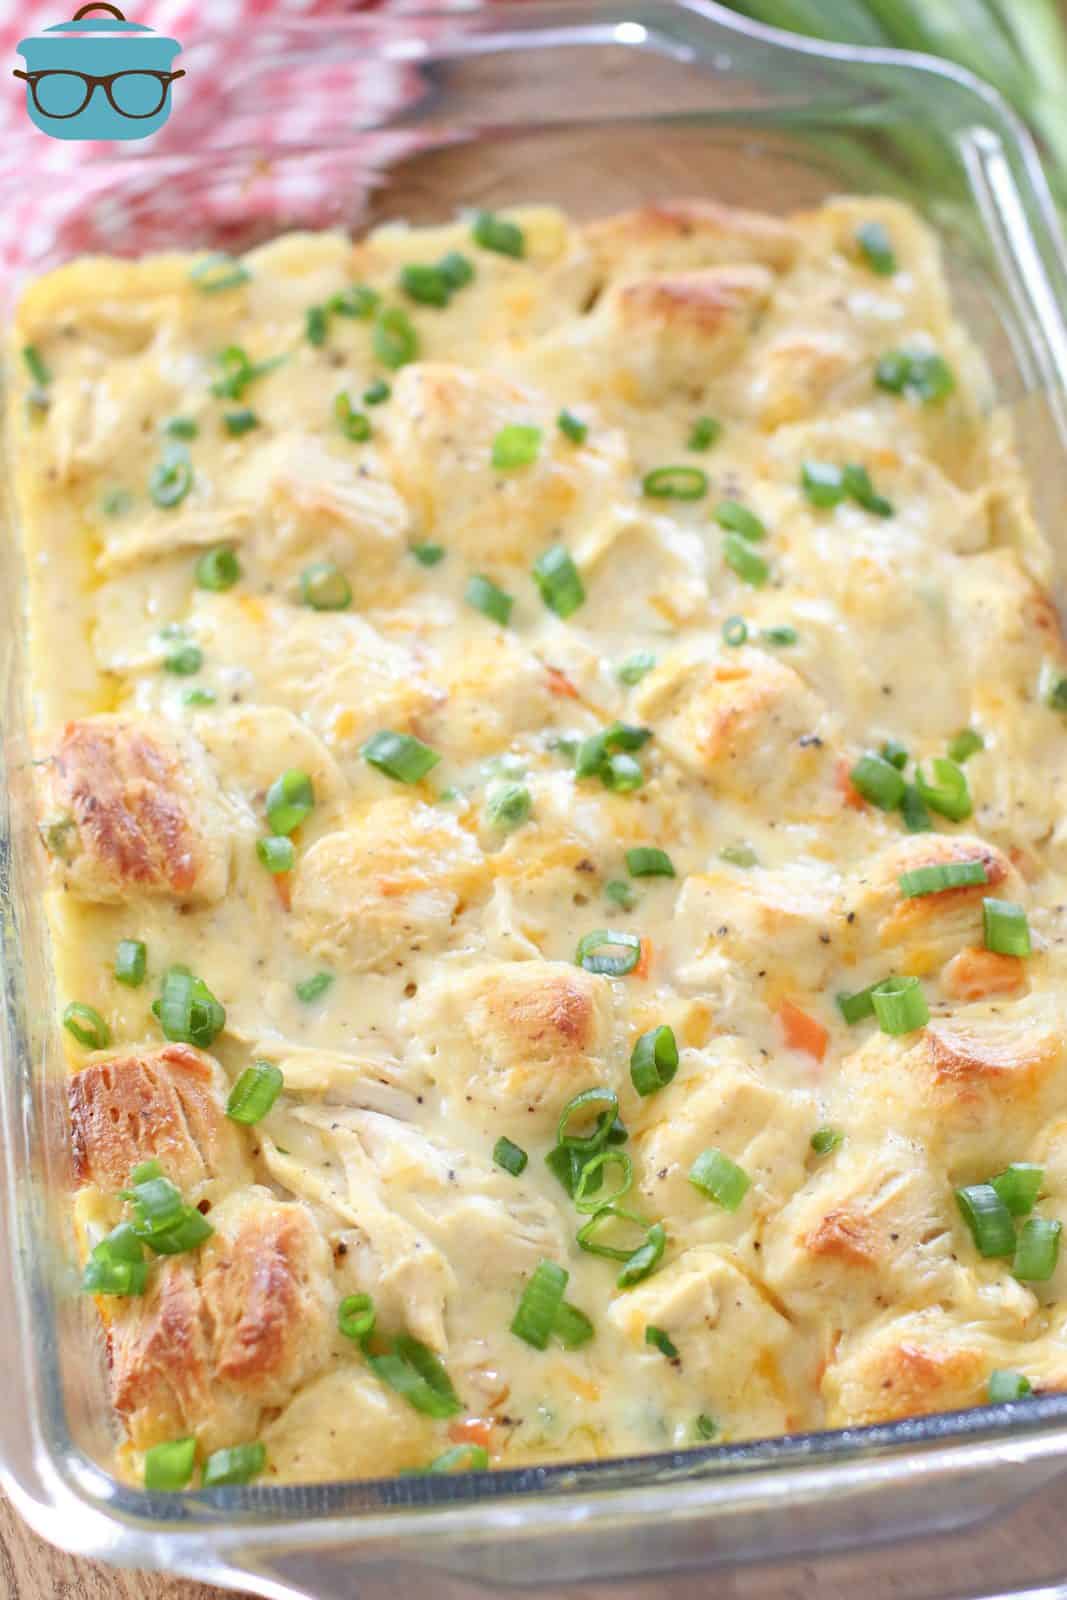 fully baked chicken and biscuits casserole in a glass baking dish.